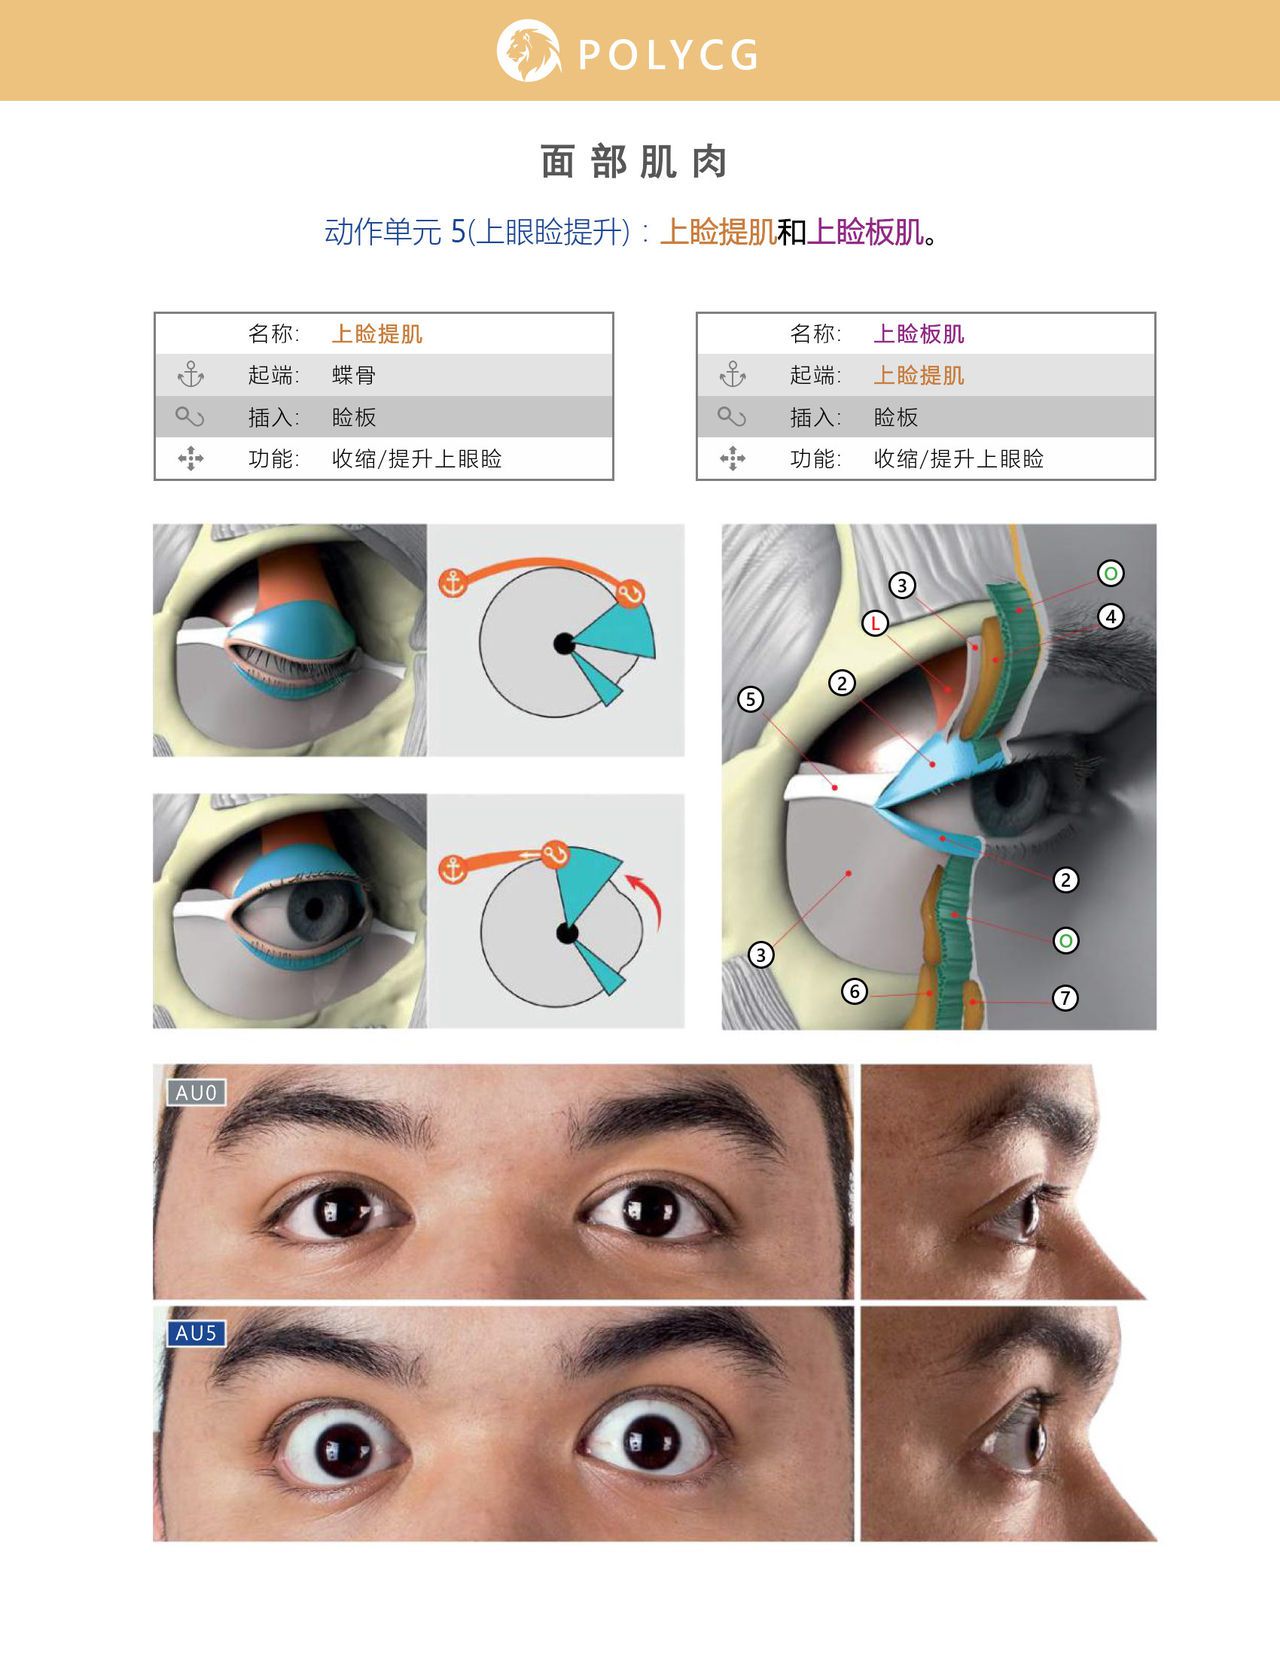 Uldis Zarins-Anatomy of Facial Expression-Exonicus [Chinese] 面部表情艺用解剖 [中文版] 59